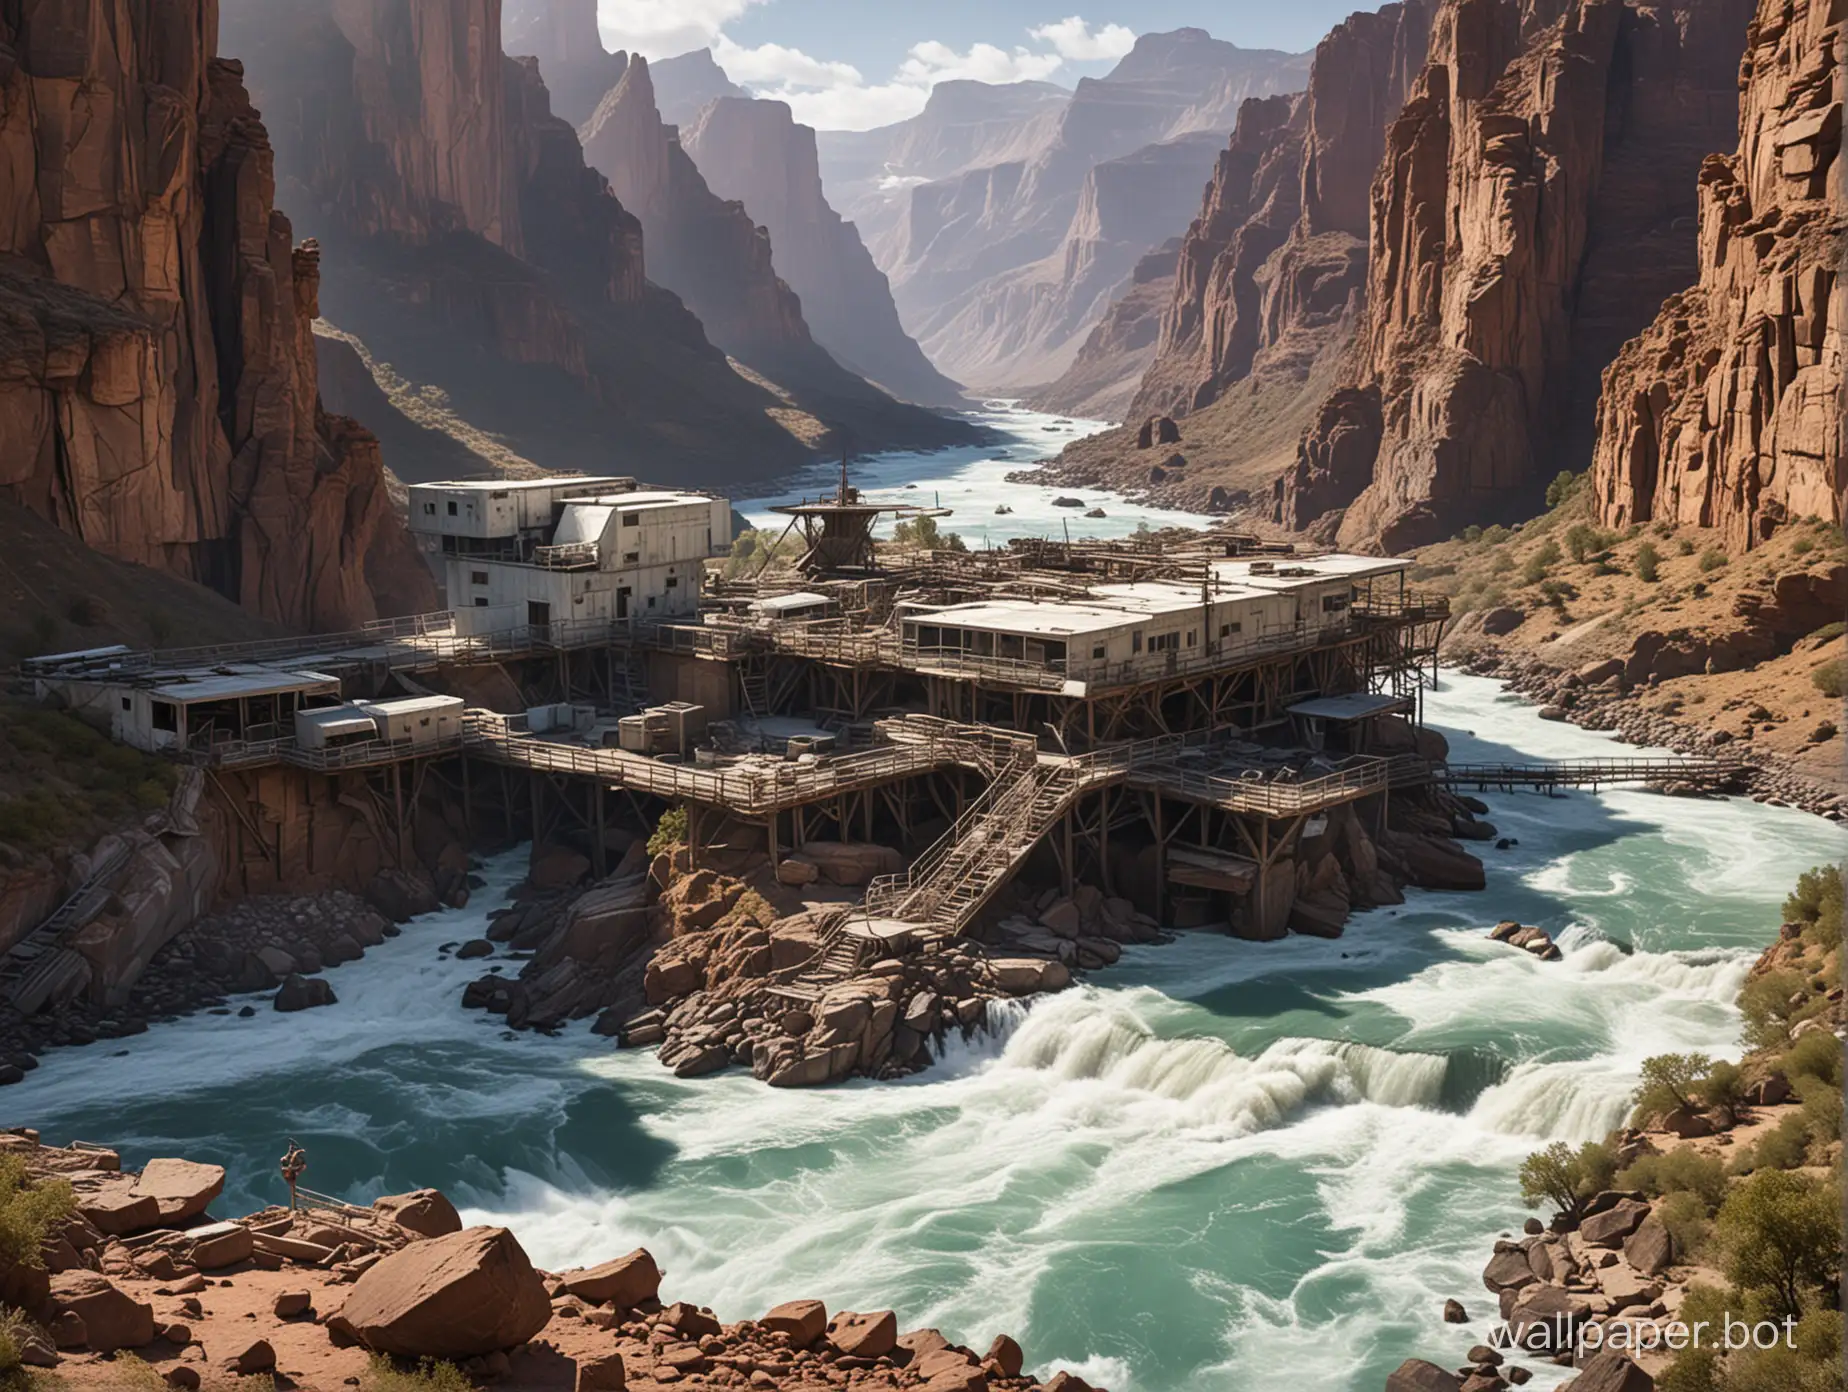 Abandoned-Research-Station-Overlooking-Rushing-Canyon-Rapids